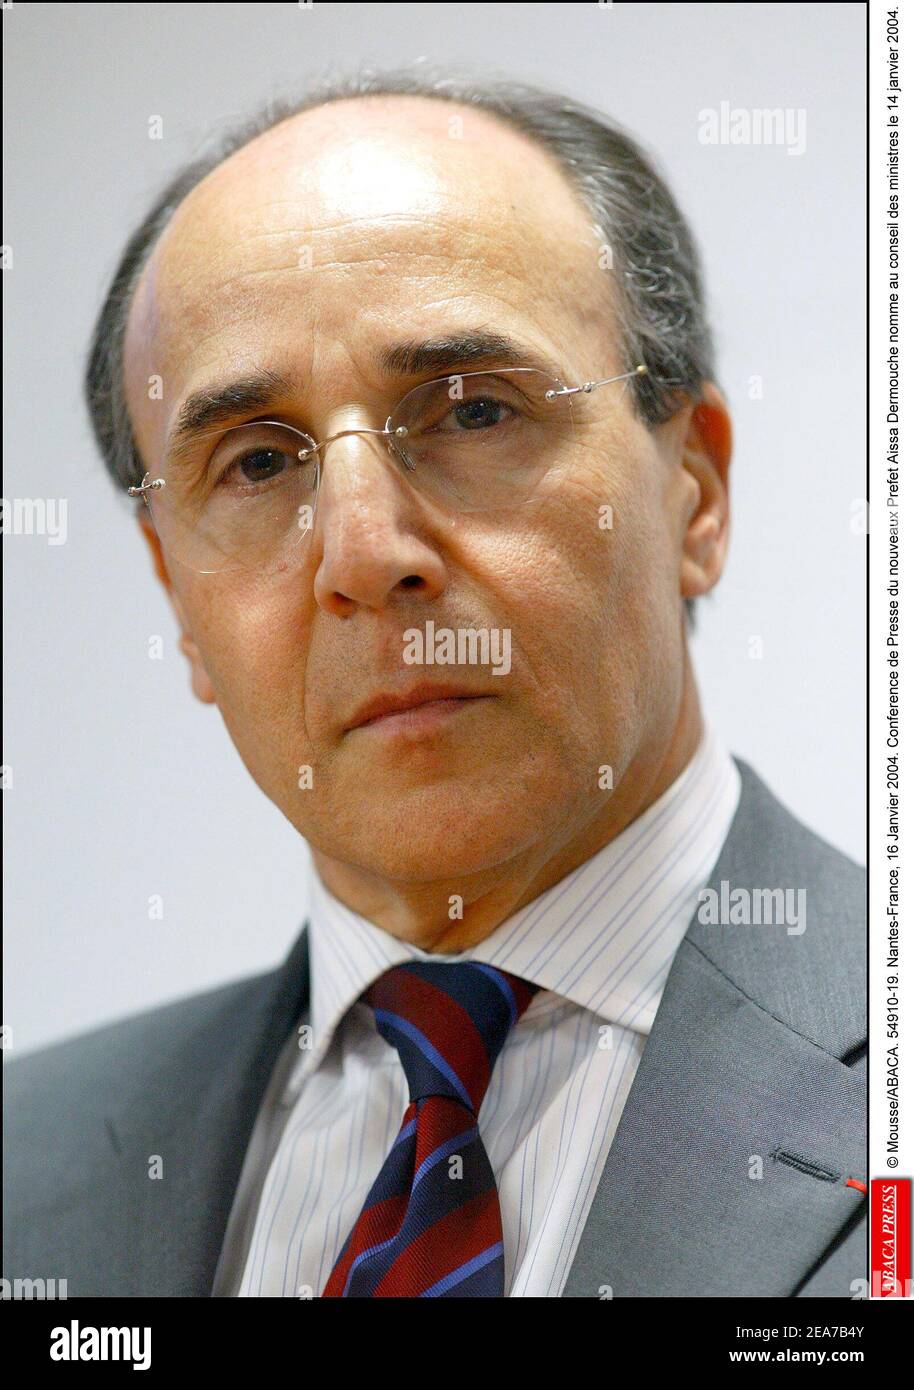 © Mousse/ABACA. 54910. Nantes-France, 16 Janvier 2004. Newly appointed French Muslim prefect Aissa Dermouche holds a news conference. Stock Photo